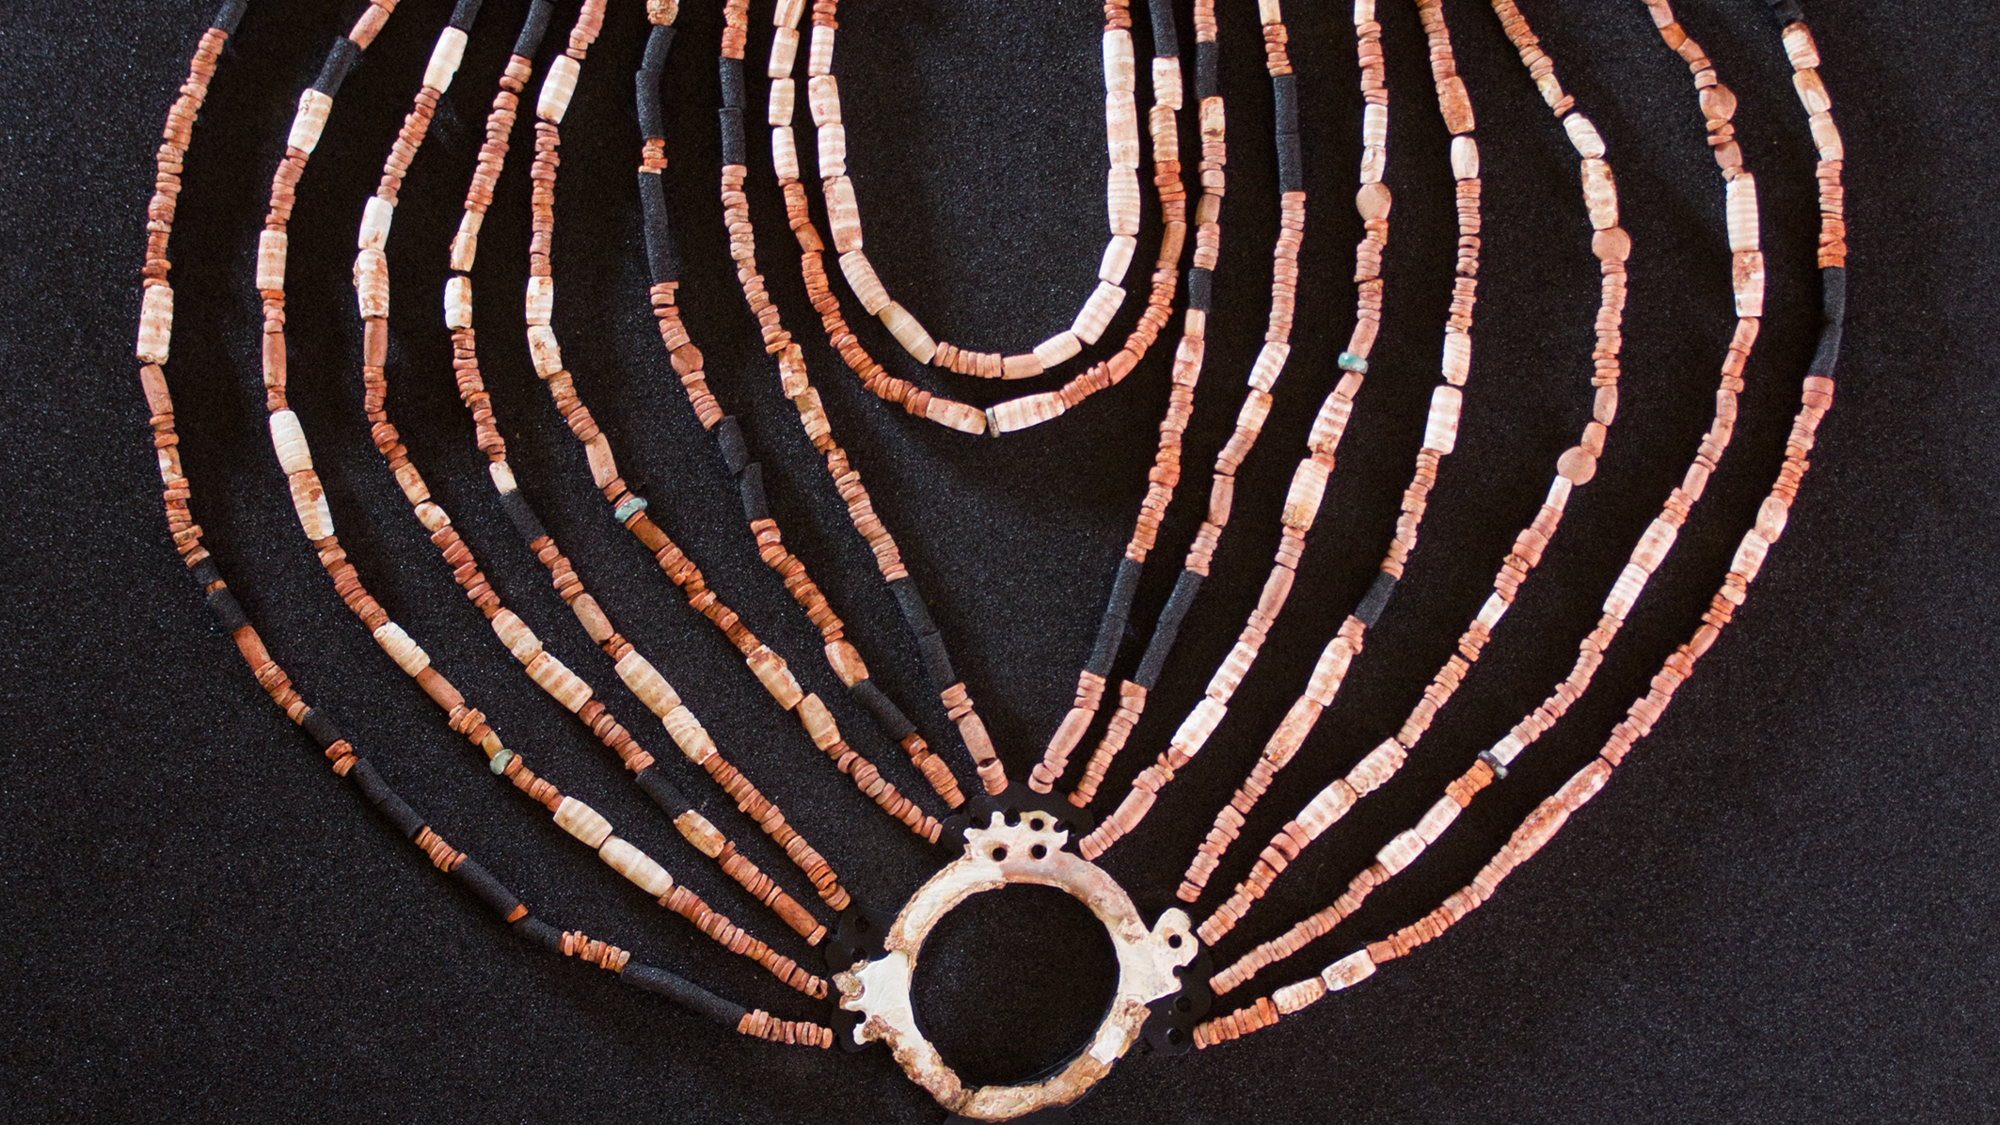 The physical reconstruction of the necklace found in the Neolithic village of Ba’ja in Jordan. It has about 16 strands of beads that meet together in a circle with a gemstone in it and three other strands on top.